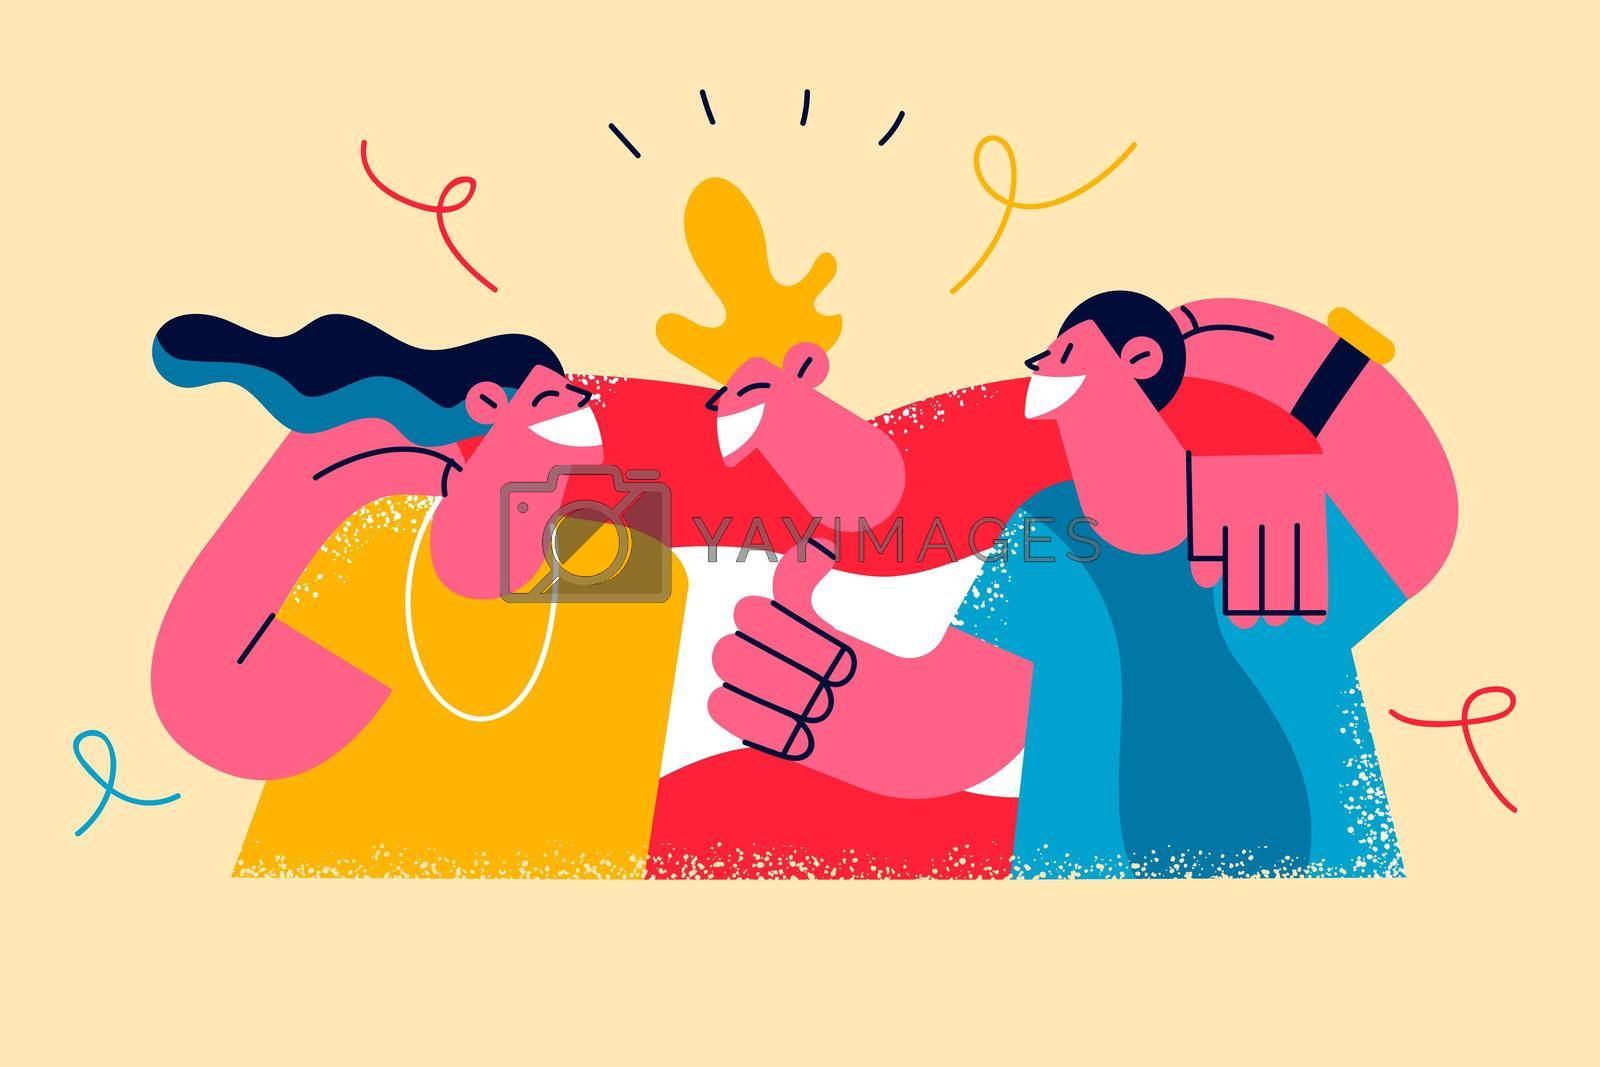 Happy friendship day celebration concept. Group of young cheerful people cartoon characters standing hugging embracing feeling positive together vector illustration